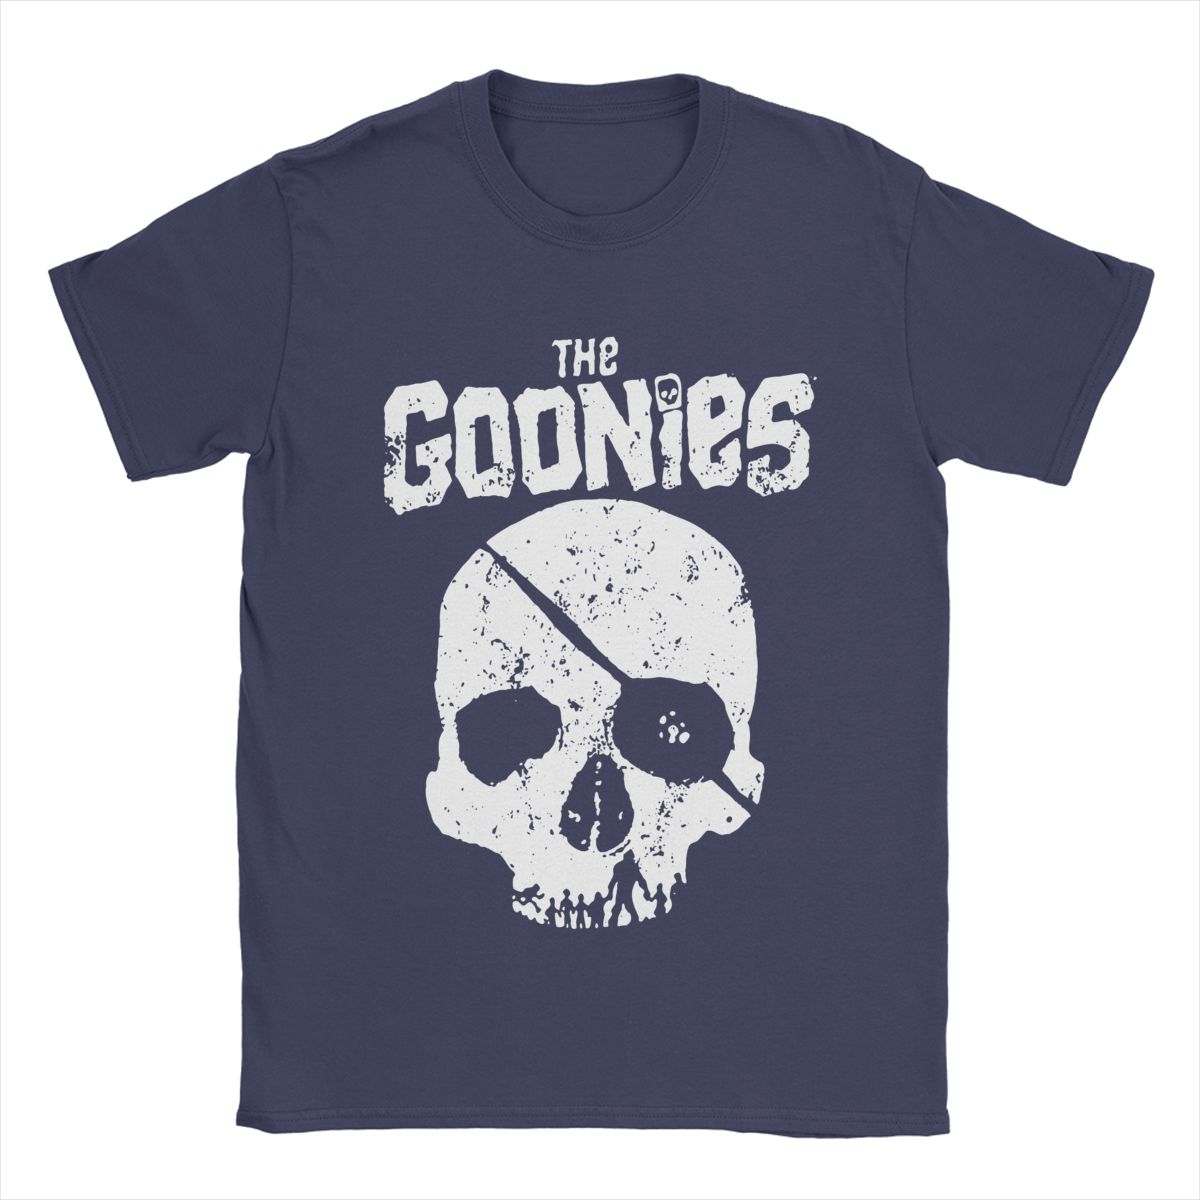 The Goonies - Classic 80s - Cult Childrens Movie - Vintage Film Lover T-Shirt-Navy Blue-S-